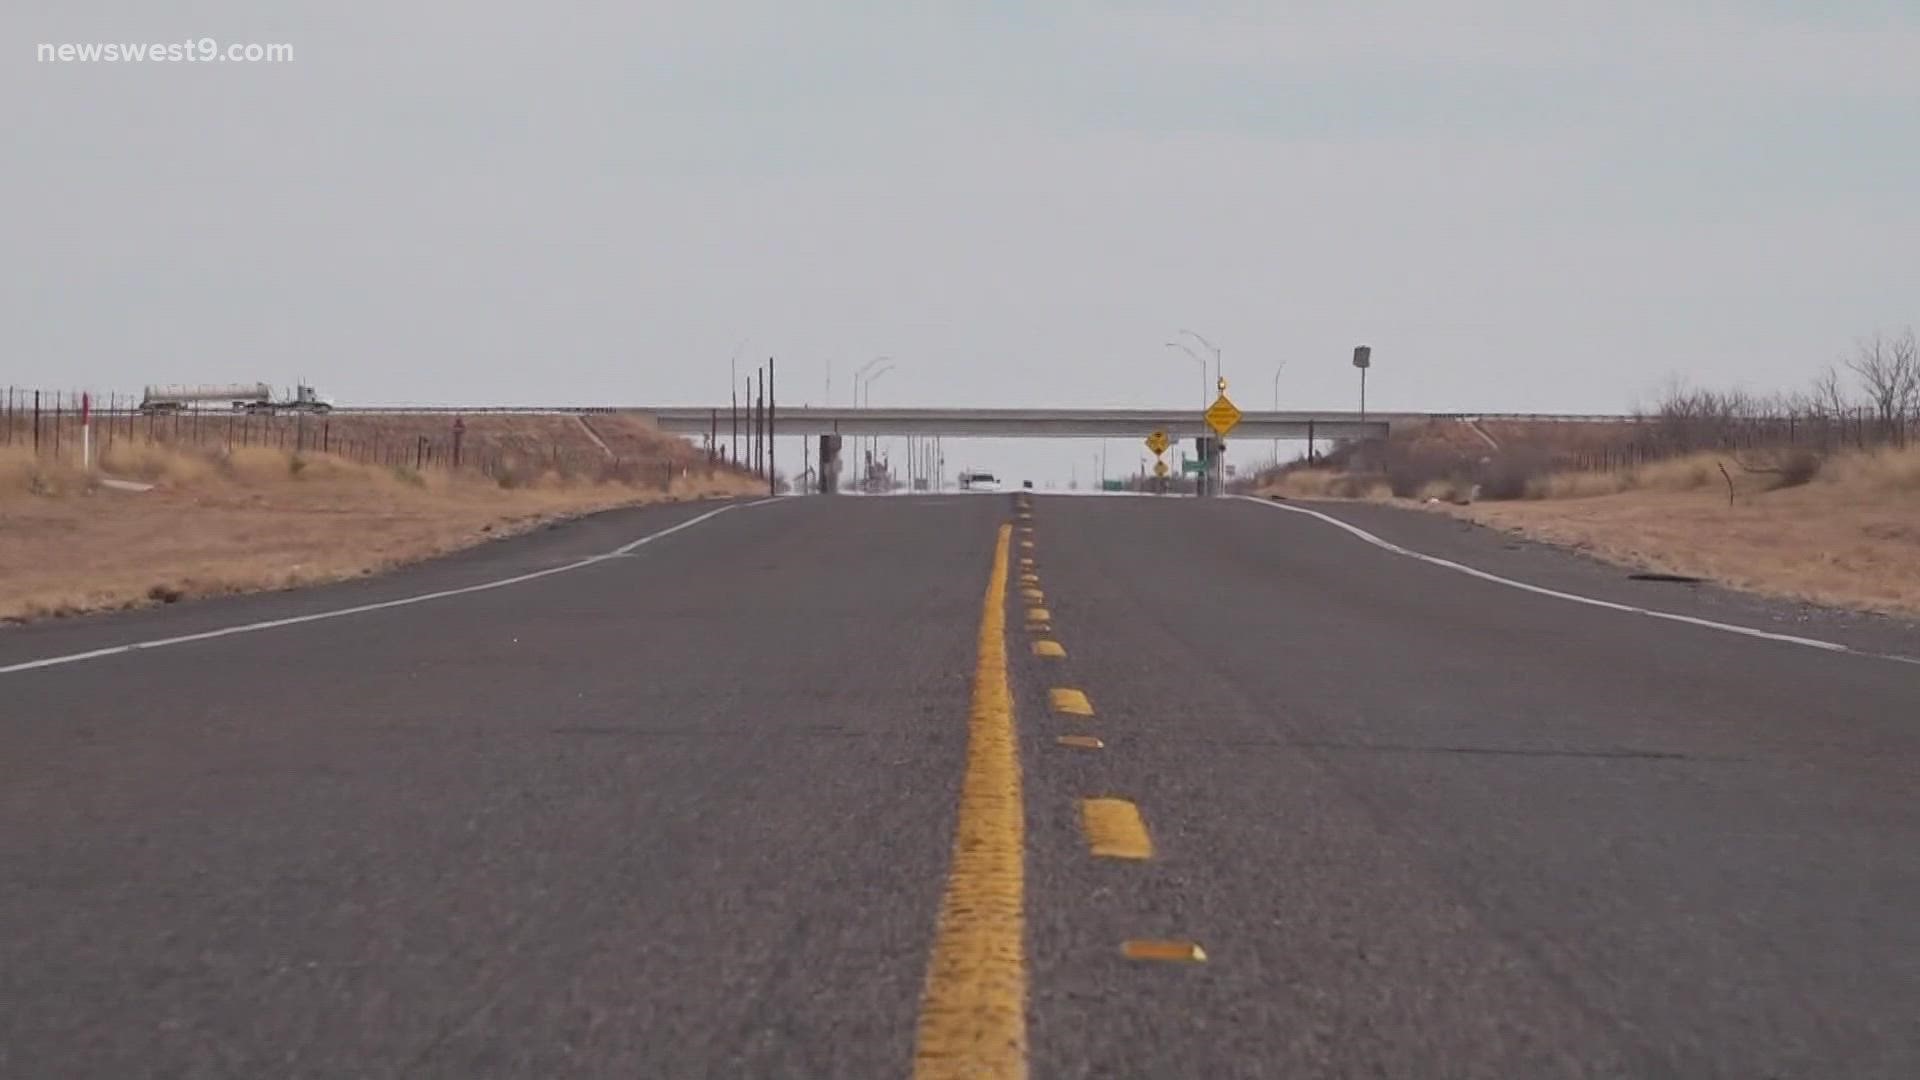 MOTRAN said that when a crash occurs, they look into how they can make those roadways safer.